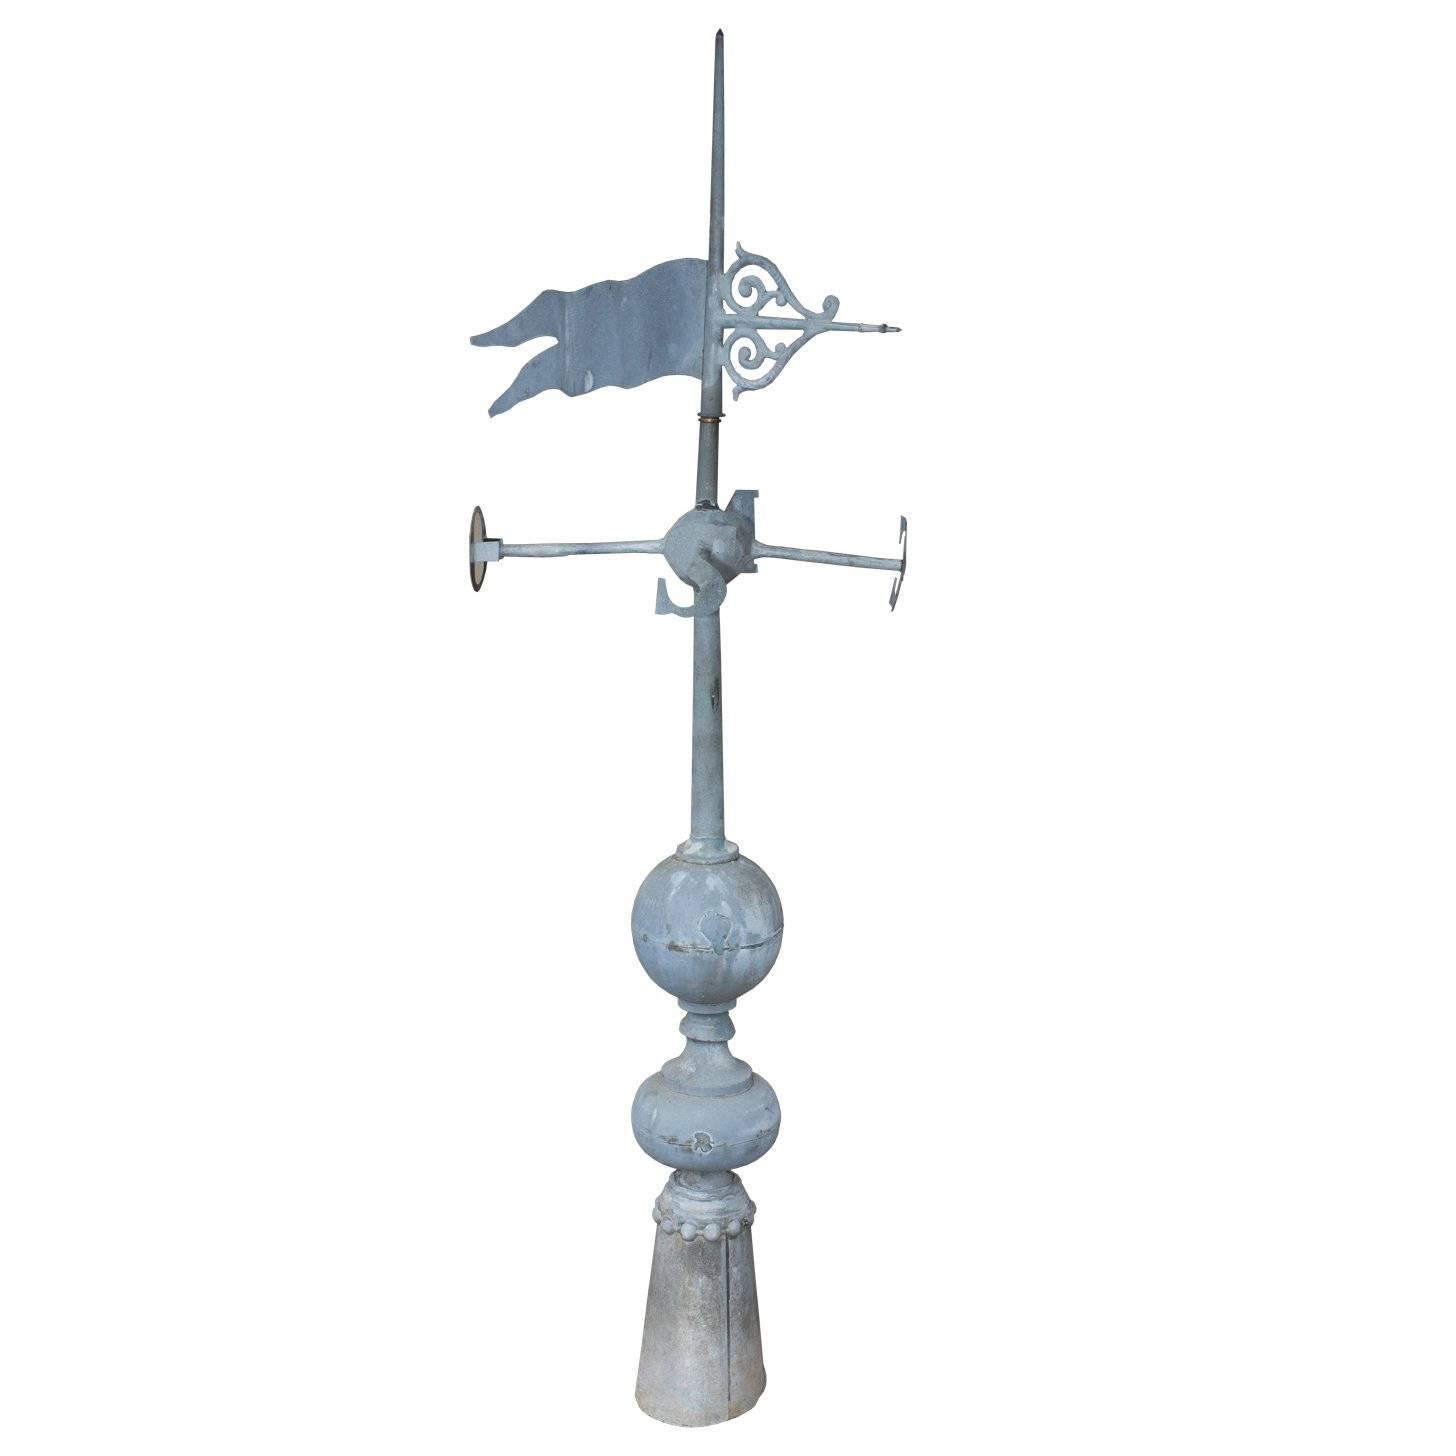 19th Century French Zinc Rooftop Weathervane Finial